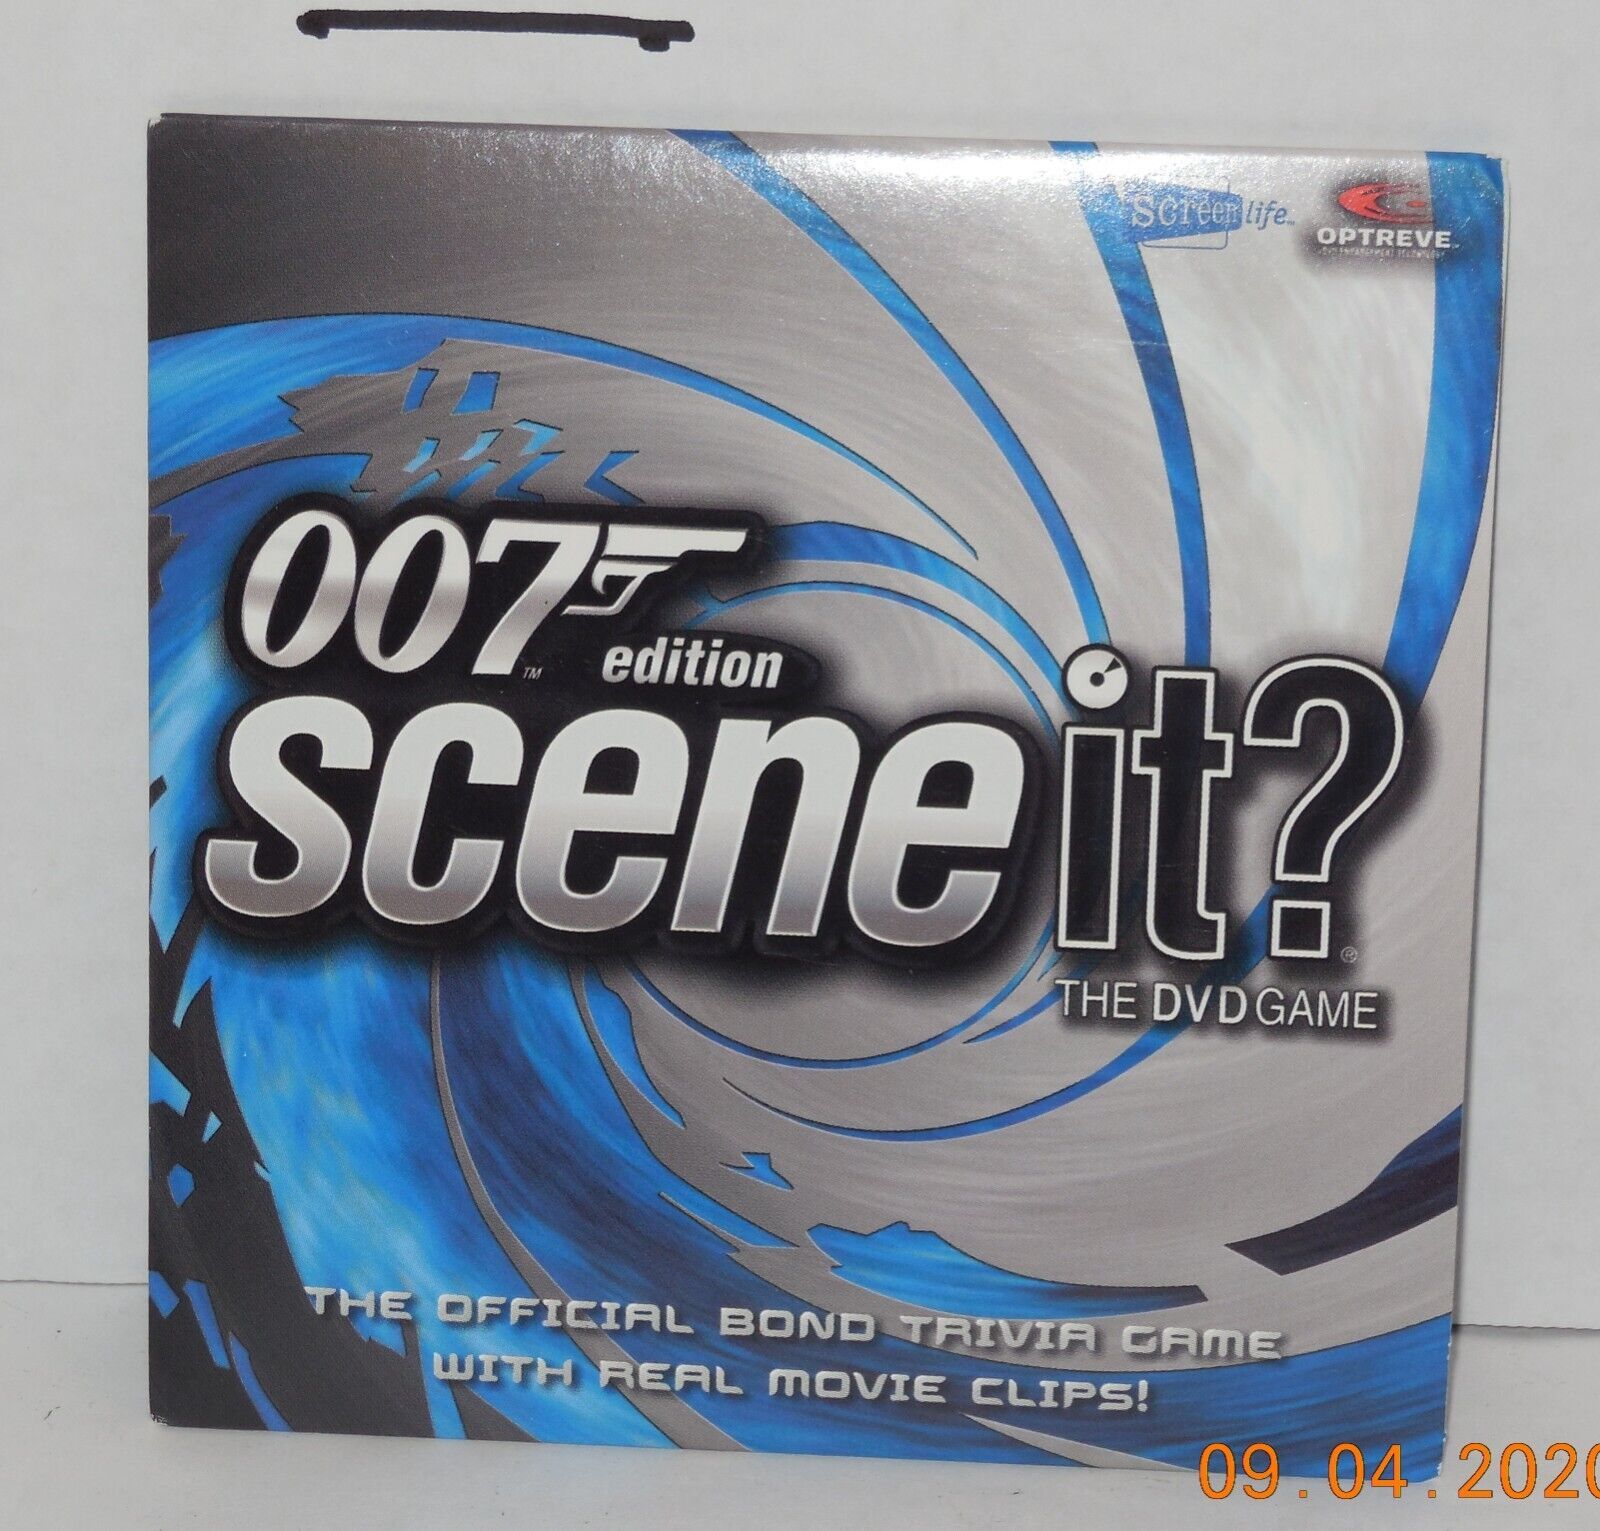 Primary image for Screenlife 007 Edition Scene it DVD Board Game Replacement Game DVD